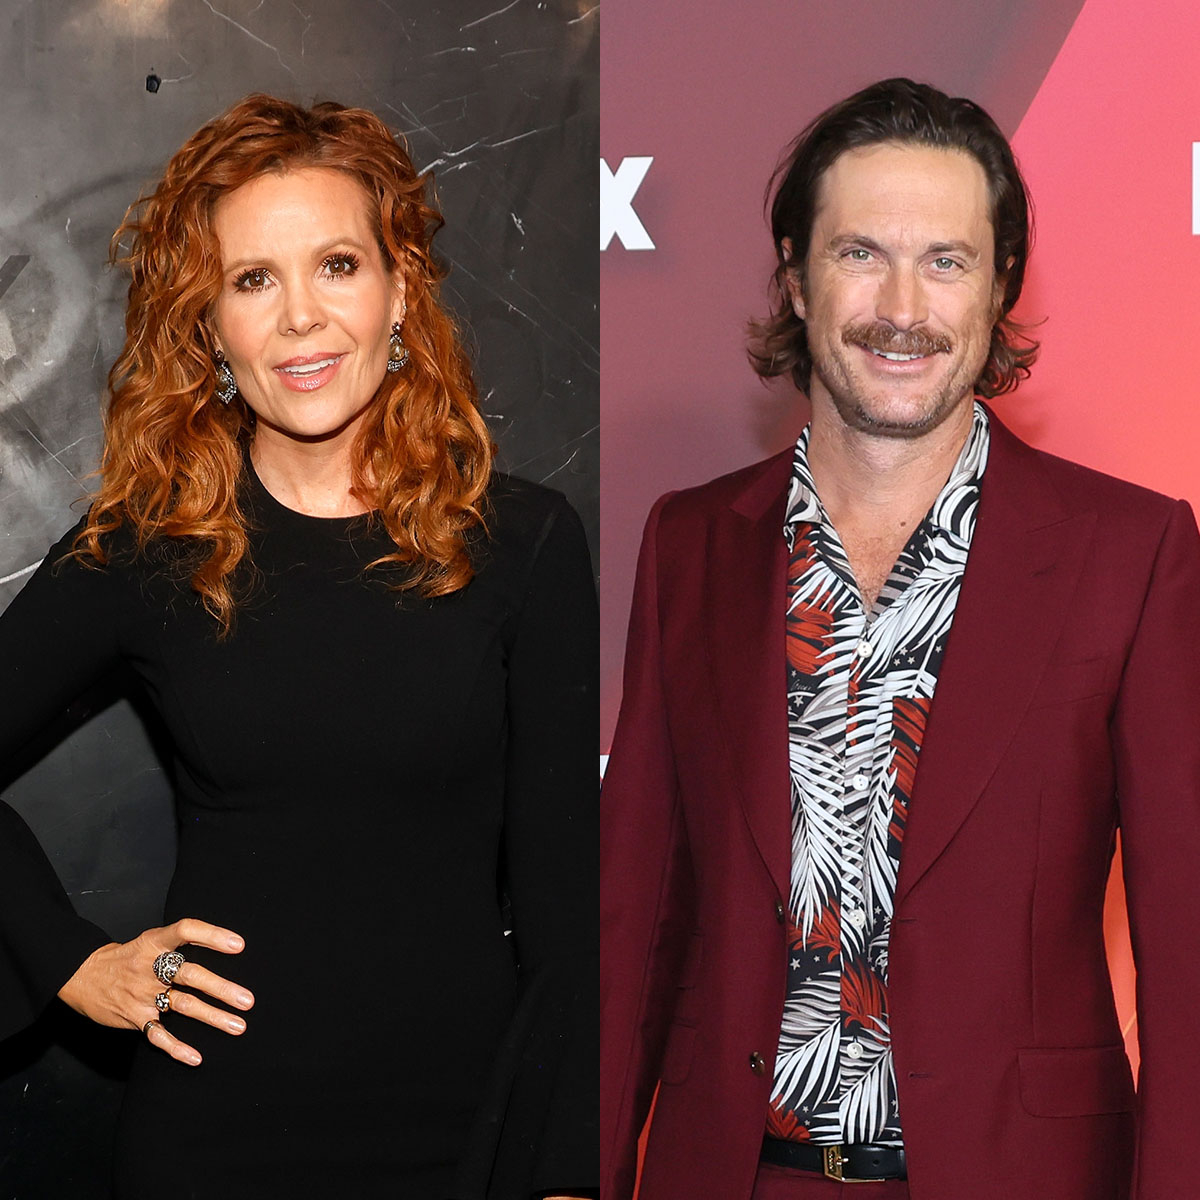 Image for article Oliver Hudson and Robyn Lively Confess They Envy Sisters Kate Hudson and Blake Lively for This Reason  E! Online  E! NEWS